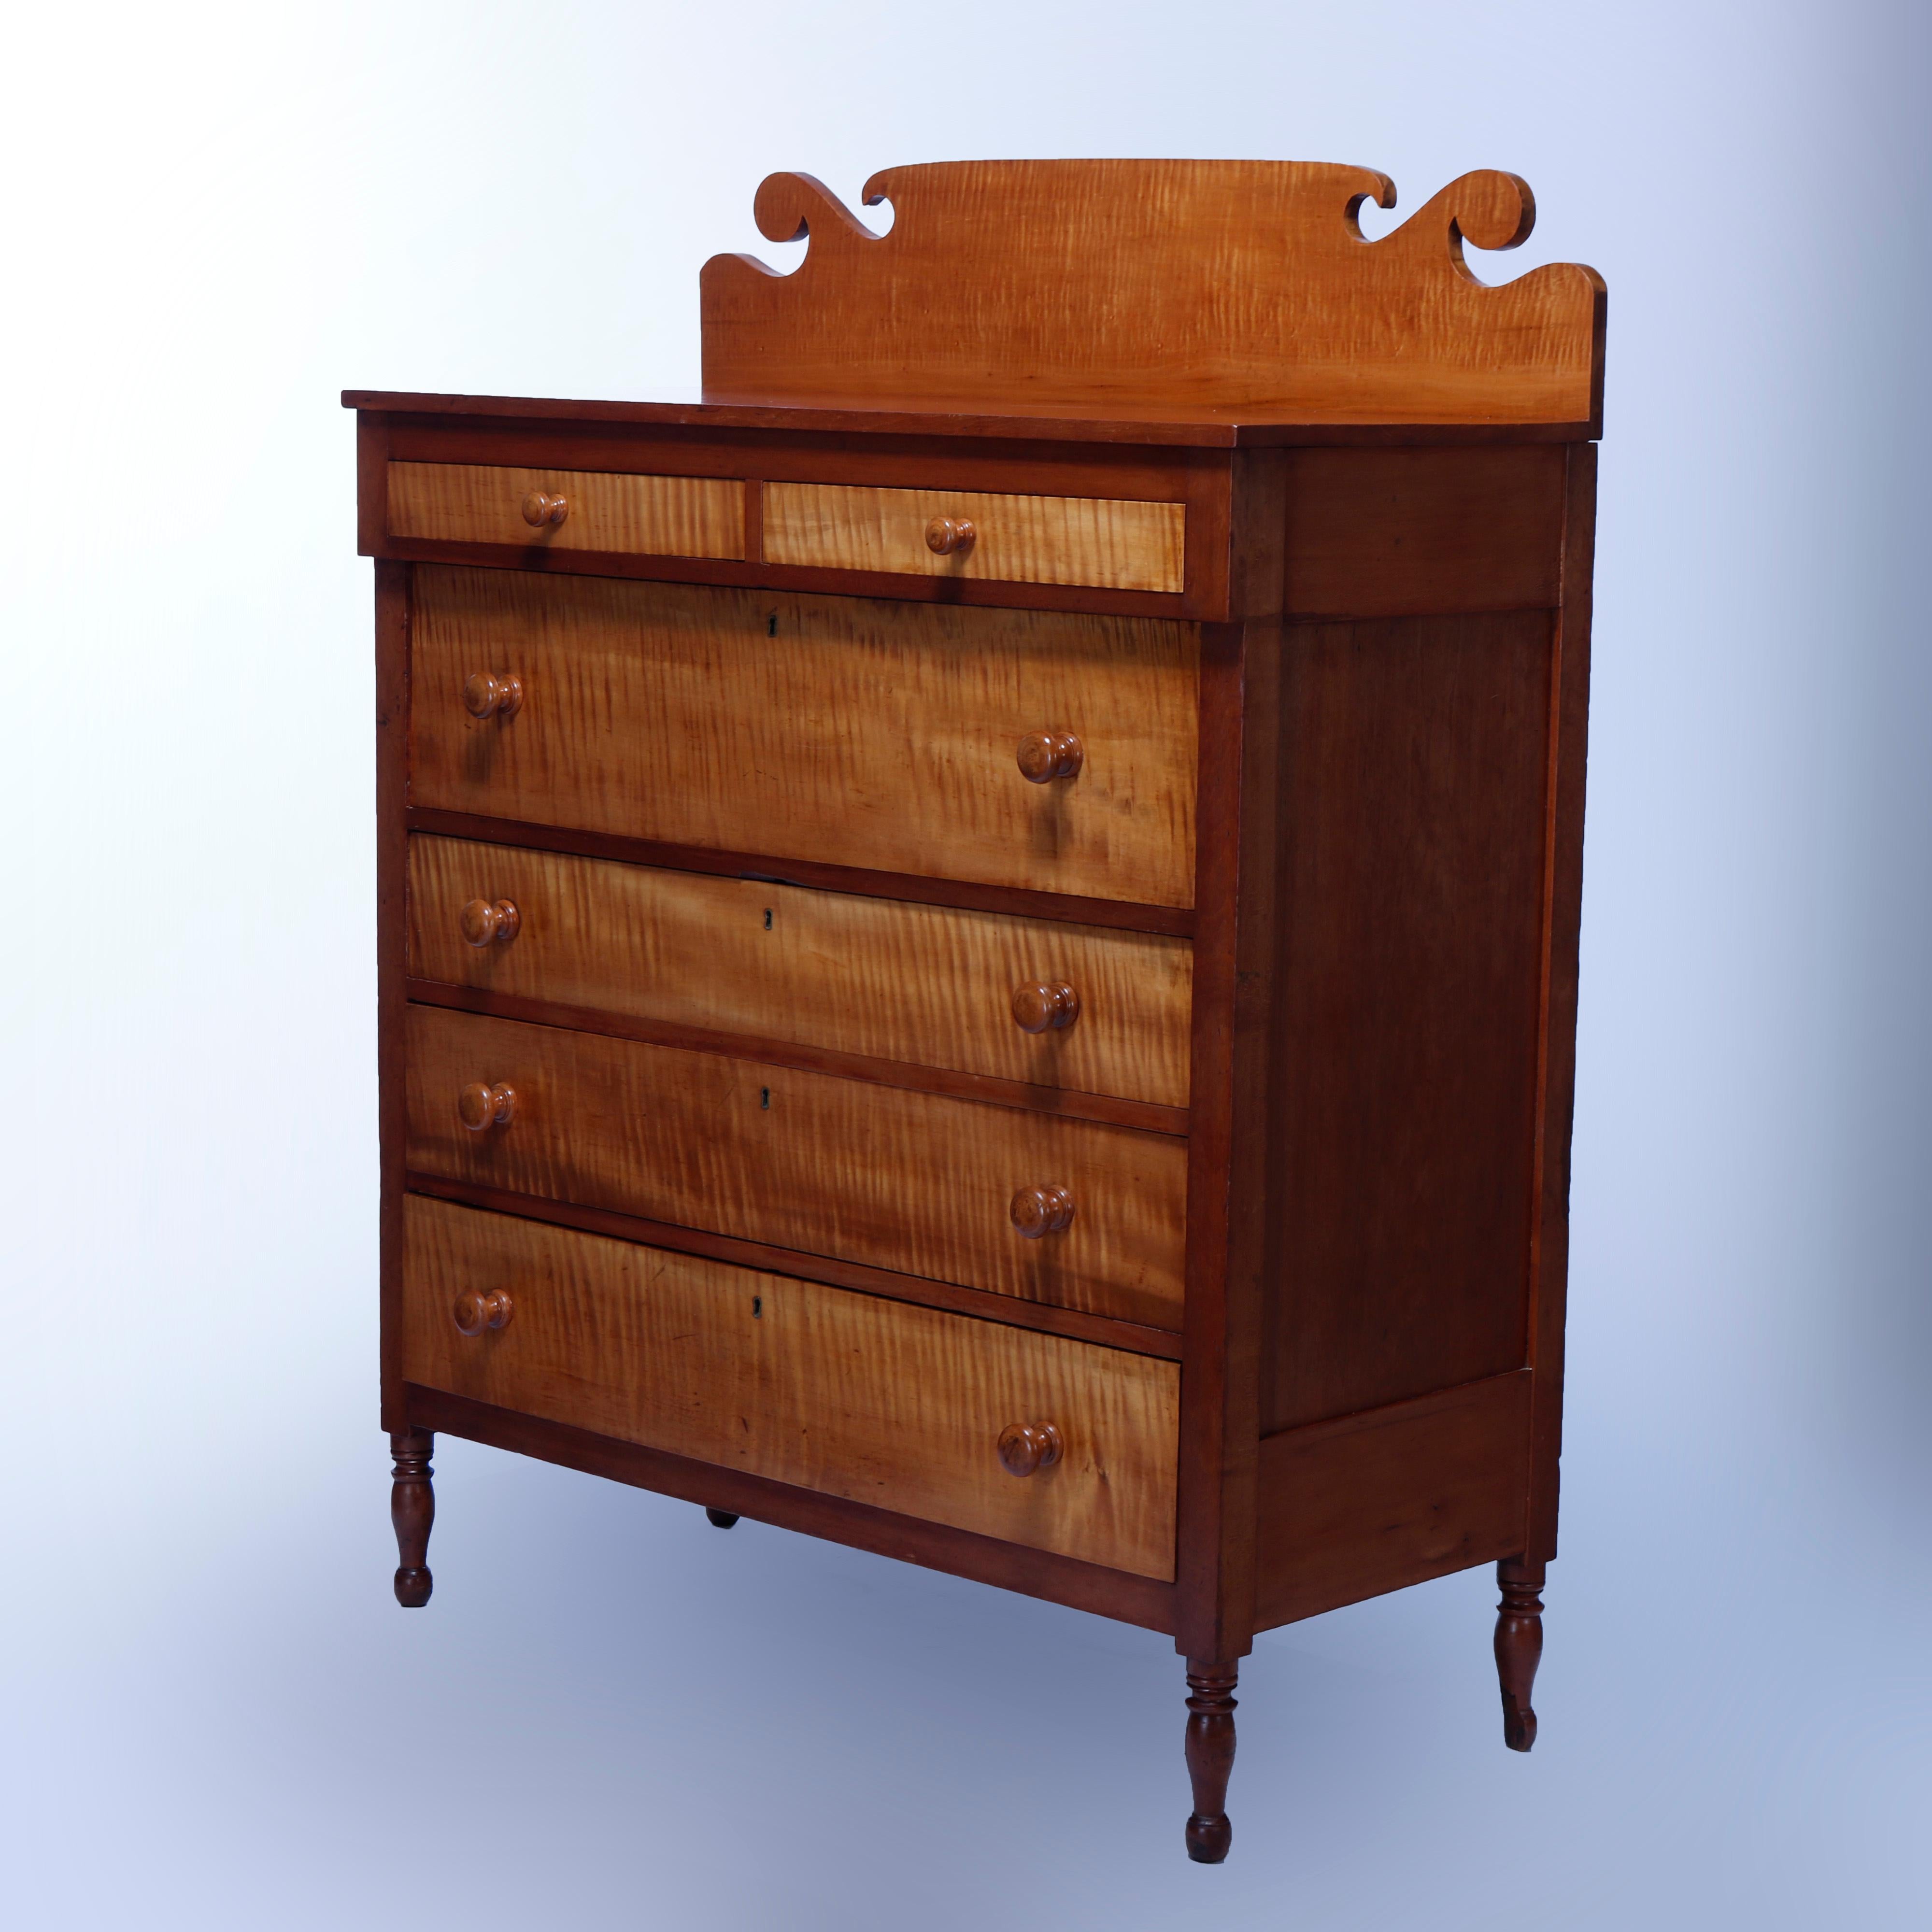 An antique Sheraton tall chest offers shaped backsplash over cherry case having birds eye maple drawers, two small over one deep surmounting three graduated, raised on turned legs, c1830

Measures - 59.25'' H x 46.5'' W x 21.25'' D.